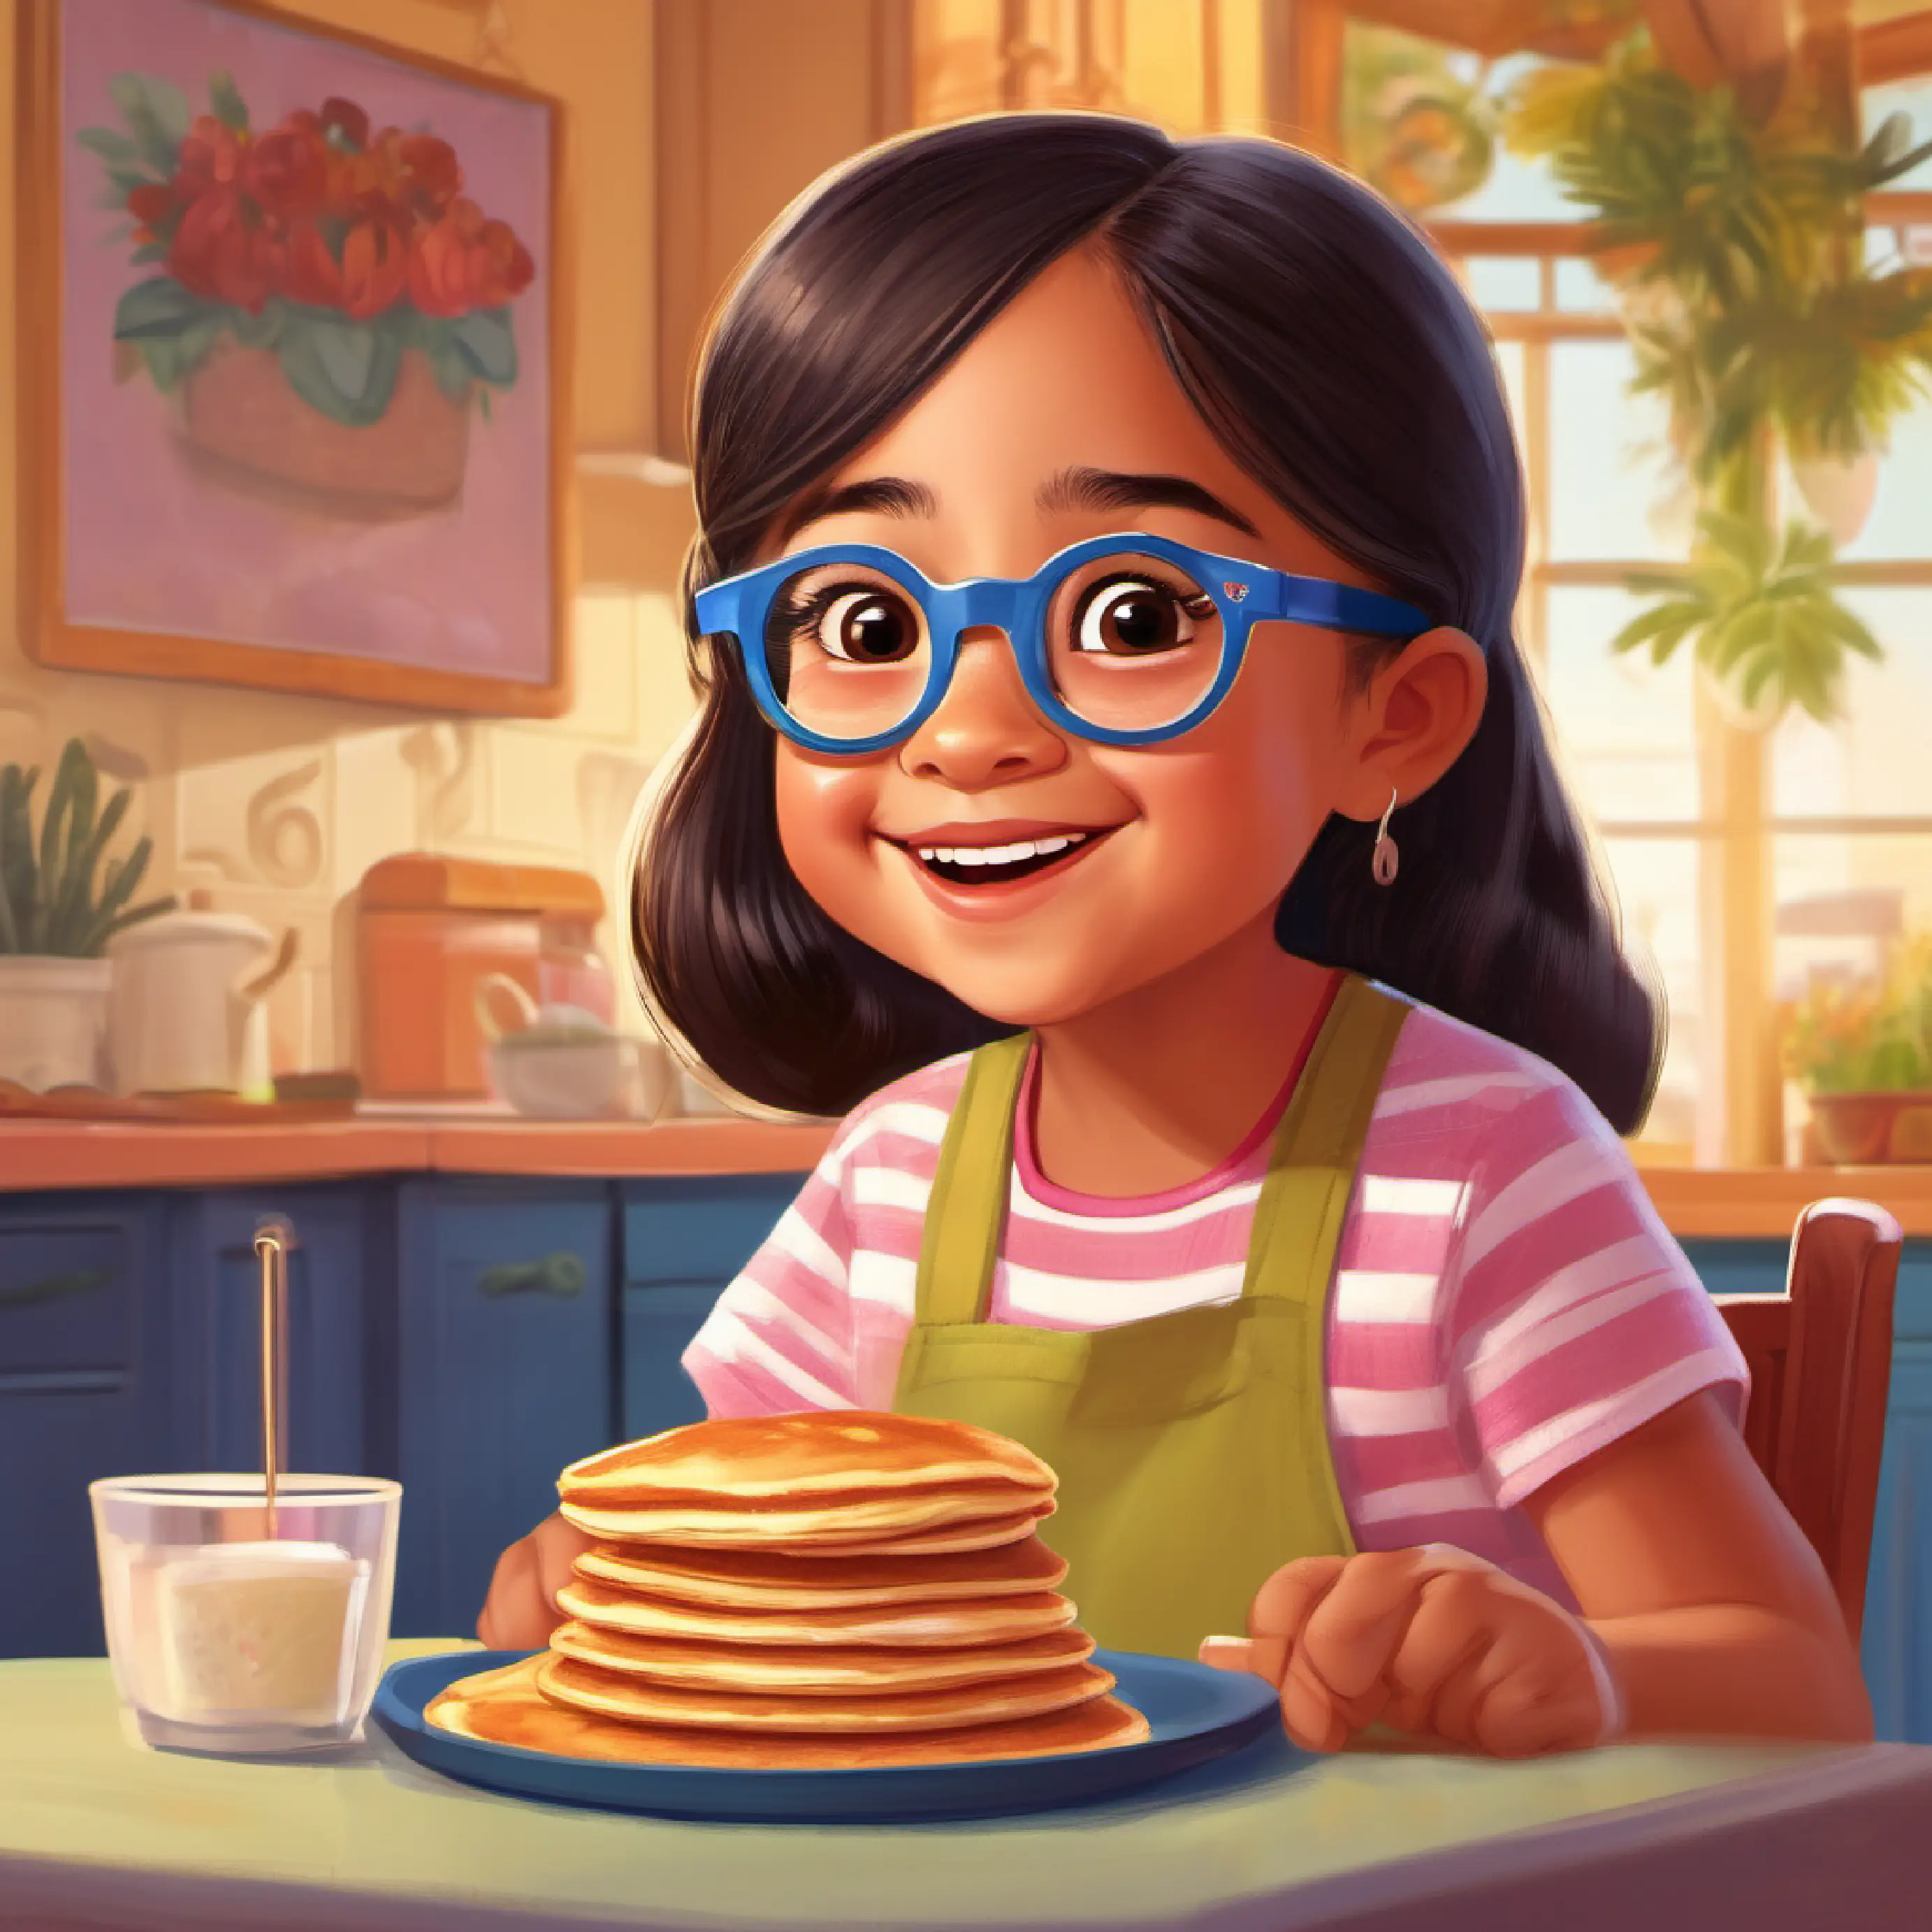 Karen and her mom eat pancakes together.